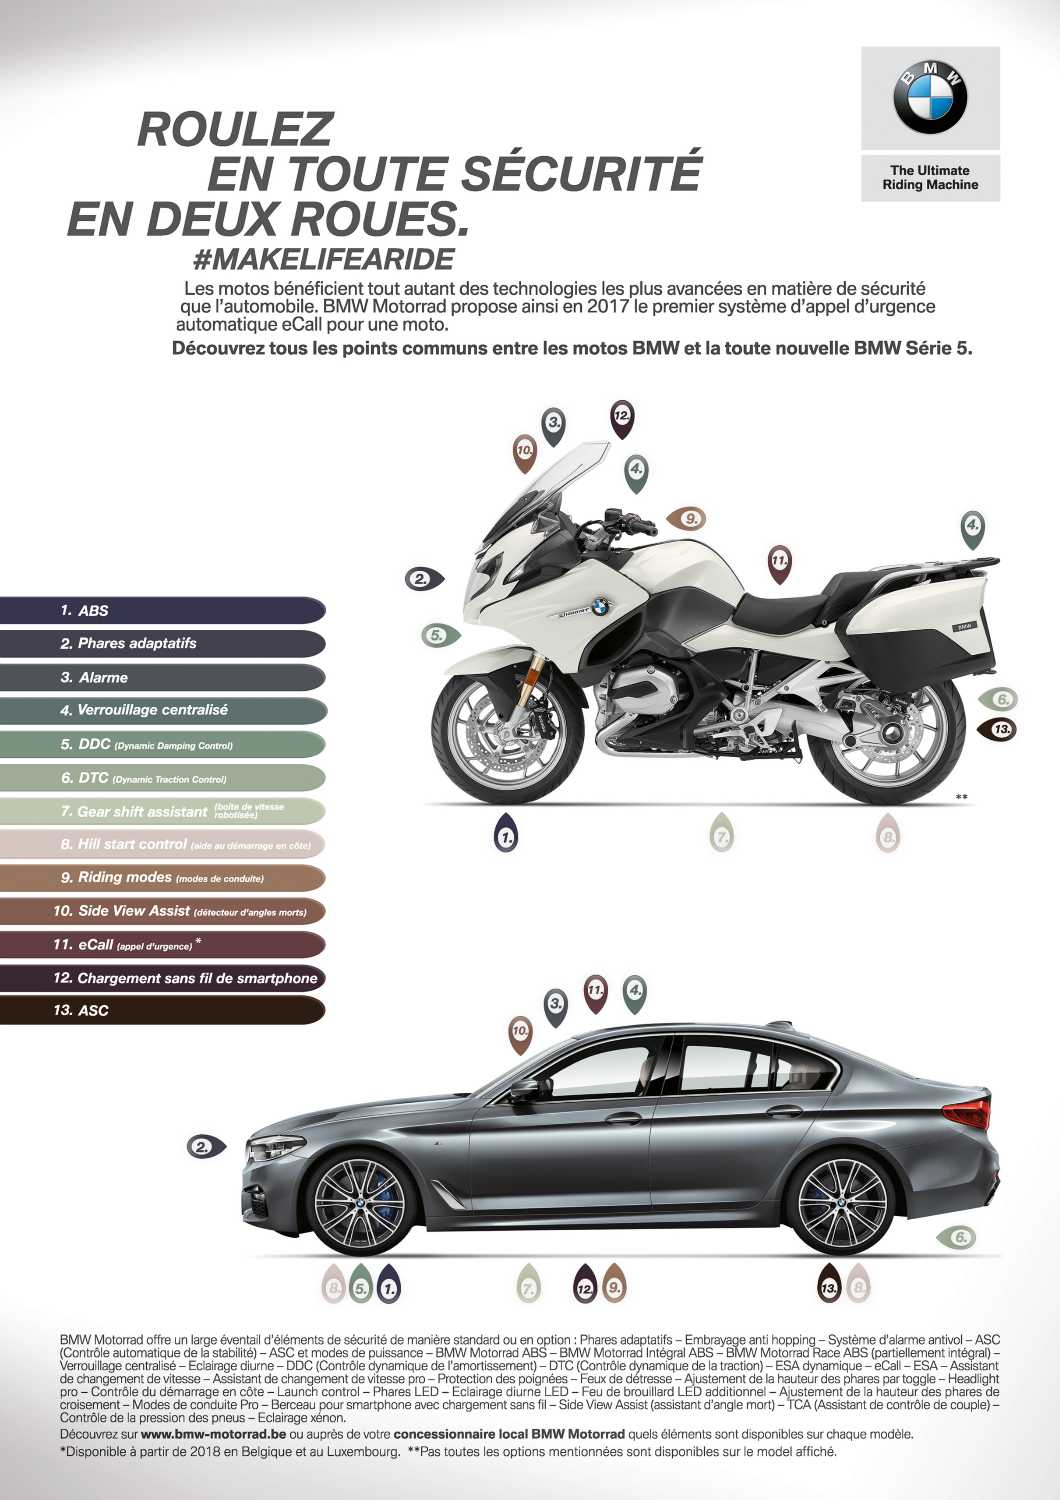 BMW Motorrad innovates with safety features on its new motorcycles (12/2016)